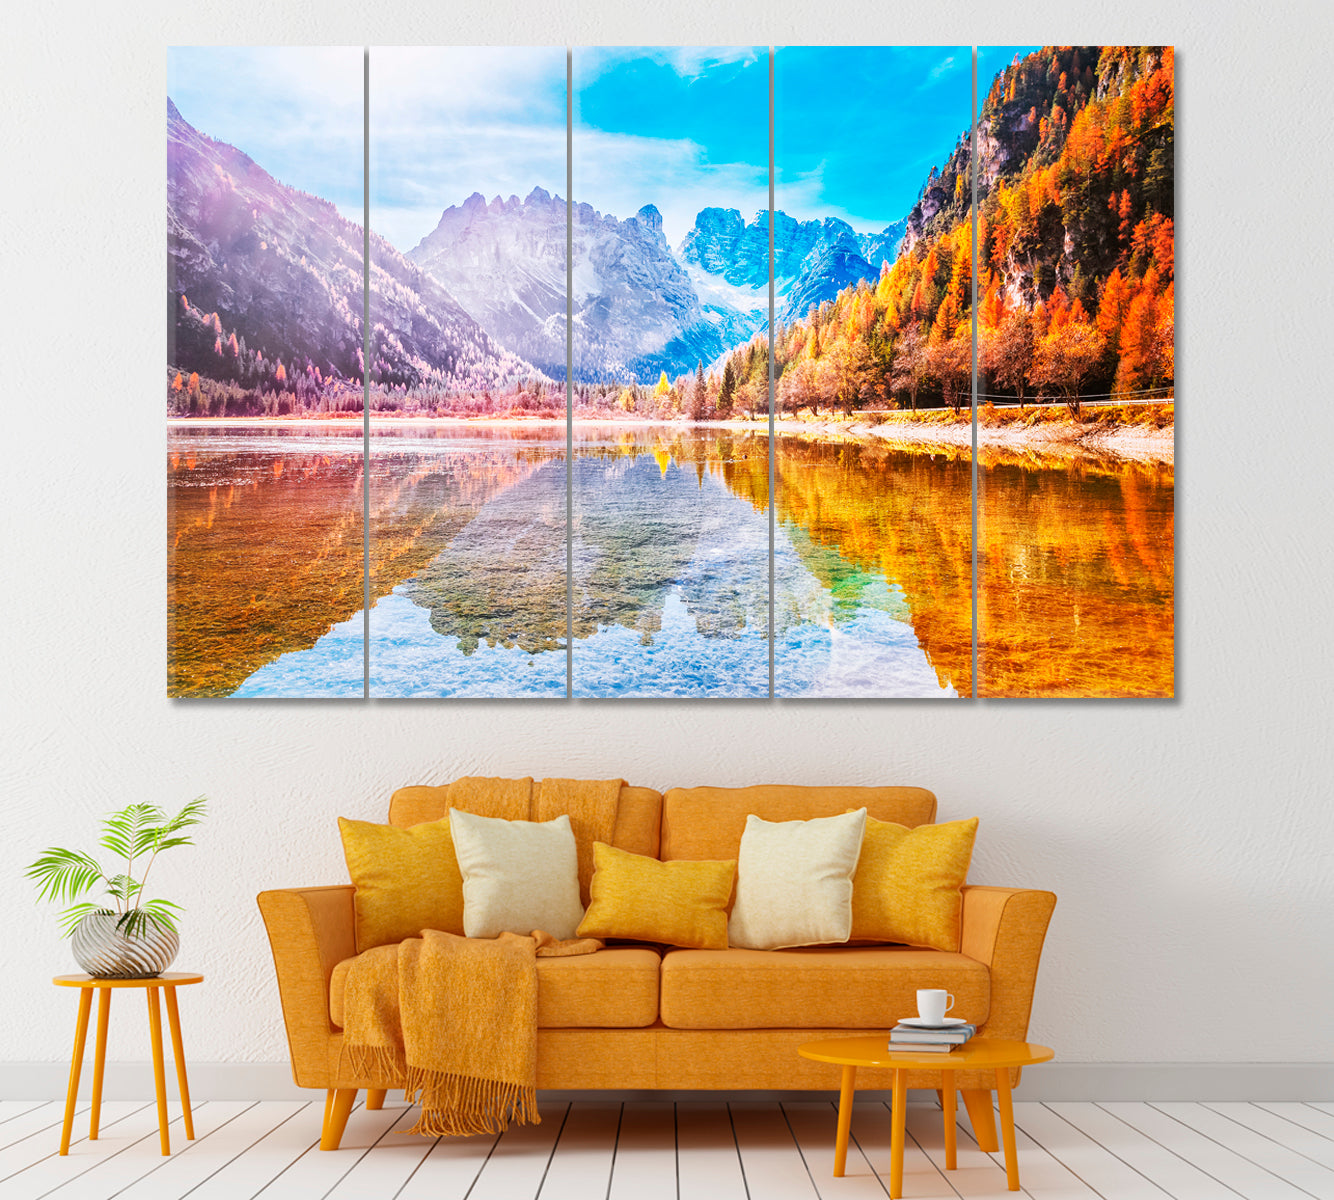 Autumn Landscape in Dolomite Alps Italy Canvas Print ArtLexy 5 Panels 36"x24" inches 